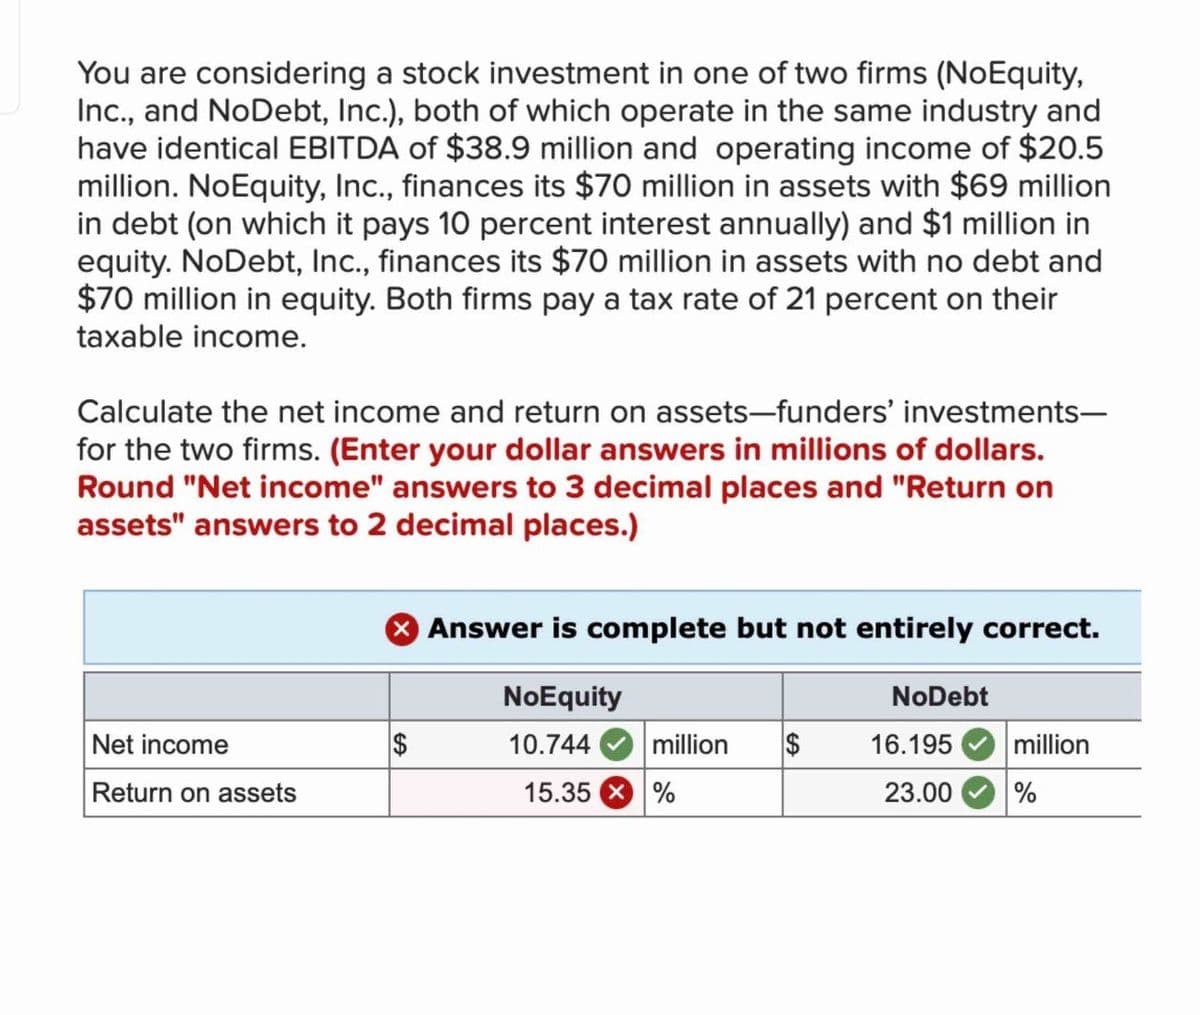 You are considering a stock investment in one of two firms (NoEquity,
Inc., and NoDebt, Inc.), both of which operate in the same industry and
have identical EBITDA of $38.9 million and operating income of $20.5
million. NoEquity, Inc., finances its $70 million in assets with $69 million
in debt (on which it pays 10 percent interest annually) and $1 million in
equity. NoDebt, Inc., finances its $70 million in assets with no debt and
$70 million in equity. Both firms pay a tax rate of 21 percent on their
taxable income.
Calculate the net income and return on assets-funders' investments-
for the two firms. (Enter your dollar answers in millions of dollars.
Round "Net income" answers to 3 decimal places and "Return on
assets" answers to 2 decimal places.)
Answer is complete but not entirely correct.
Net income
$
NoEquity
10.744
NoDebt
million $
16.195
million
Return on assets
15.35 %
23.00
%